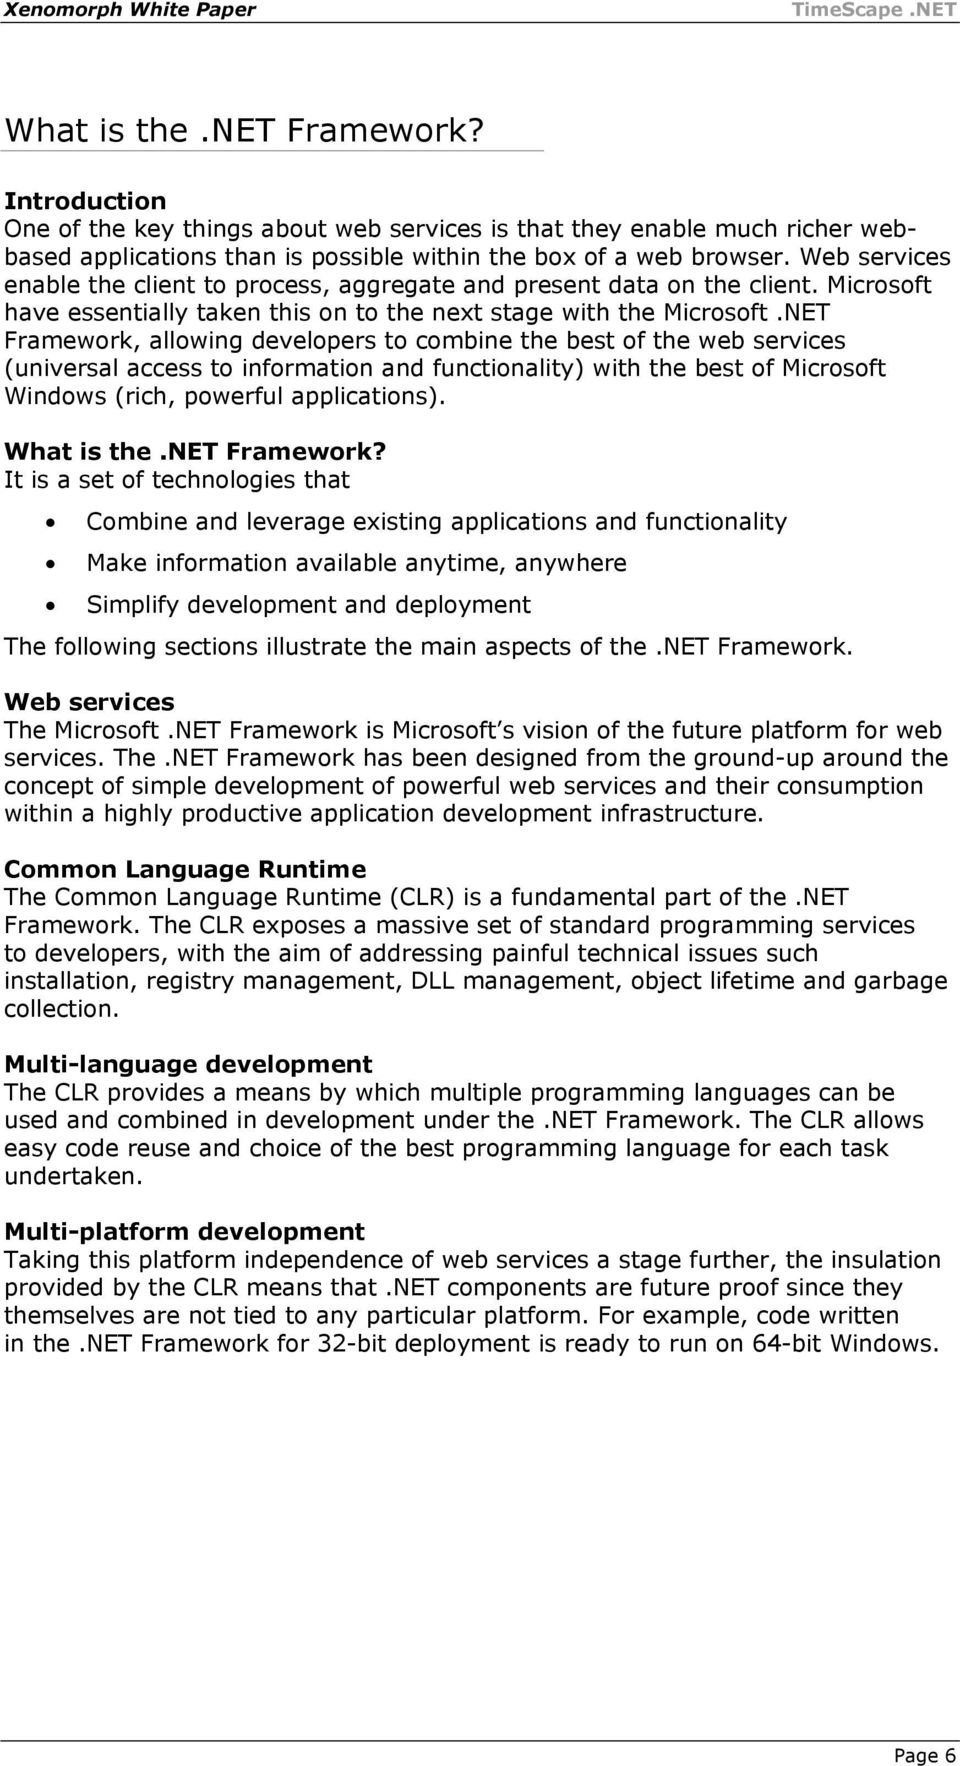 NET Framework, allowing developers to combine the best of the web services (universal access to information and functionality) with the best of Microsoft Windows (rich, powerful applications).